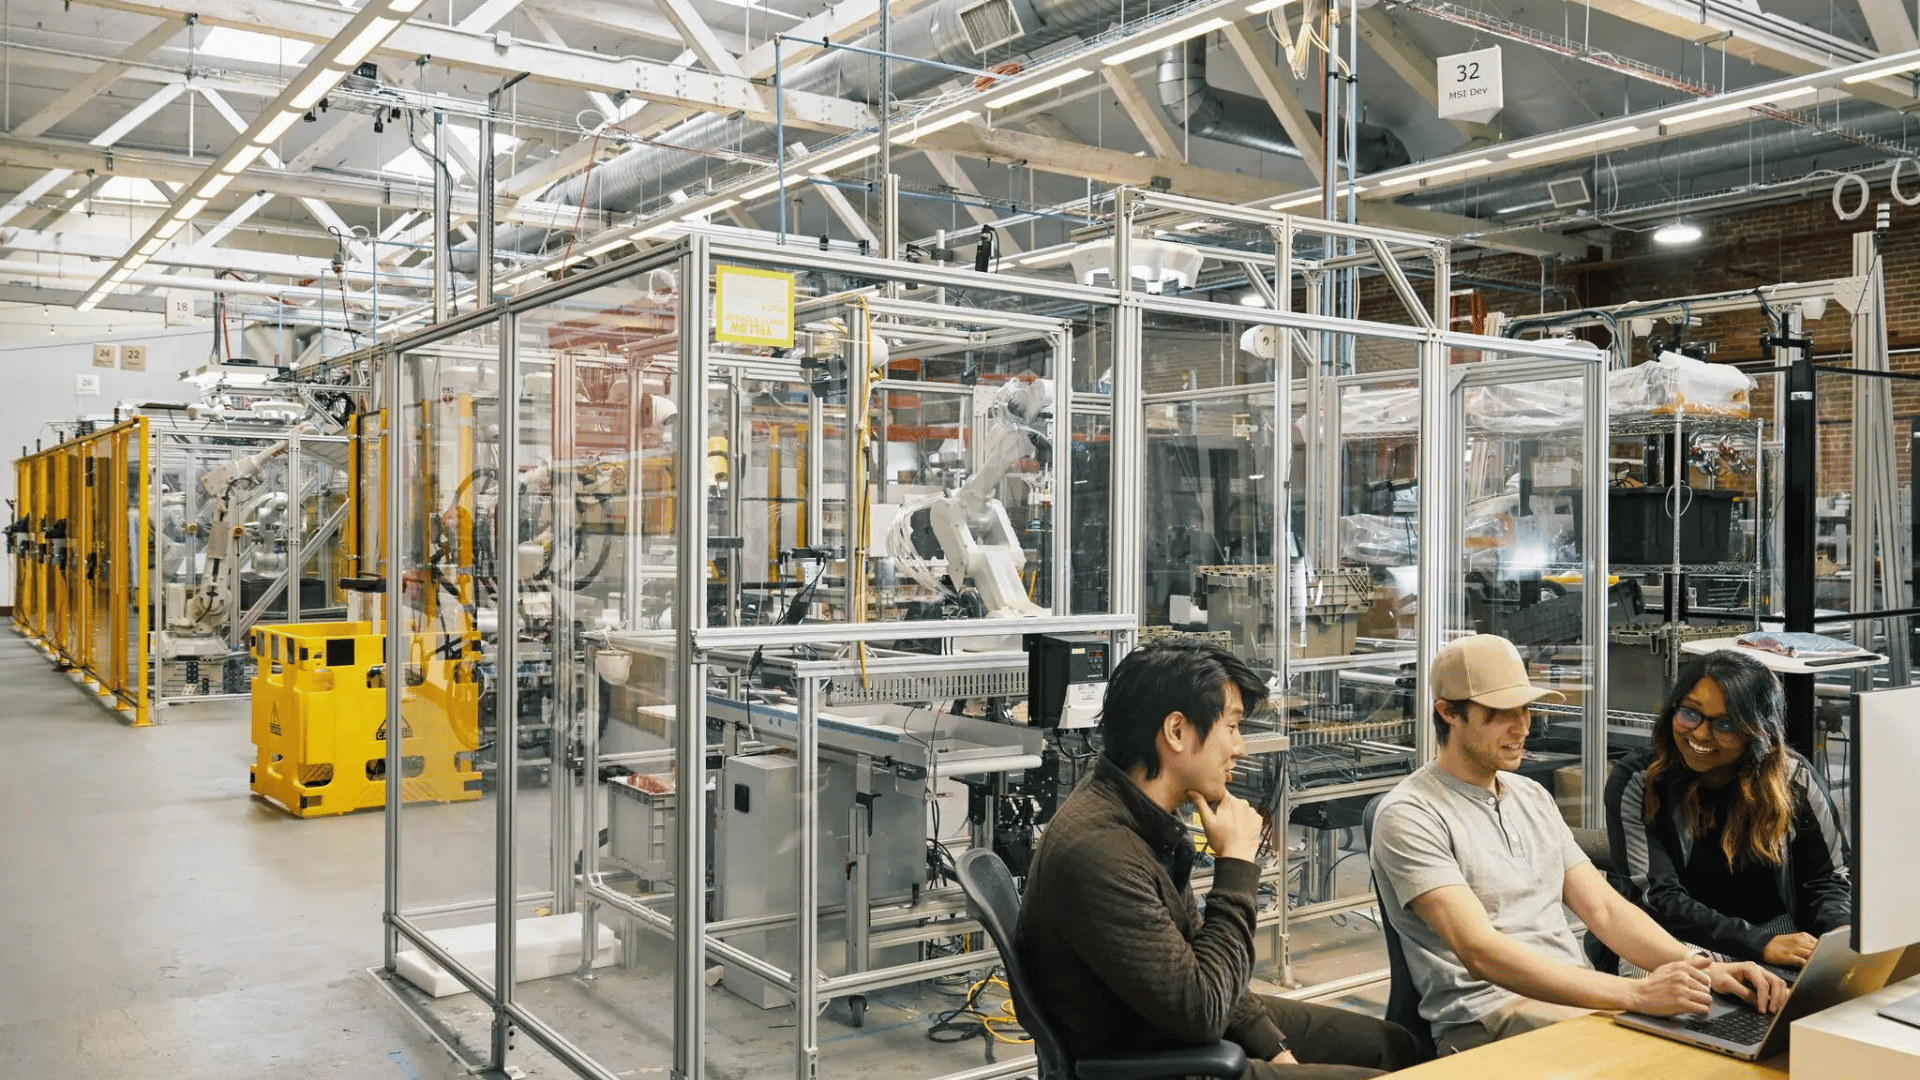 Covariant’s headquarters in Emeryville, Calif. From left, Andrew Sohn, product manager; Daniel Adelberg, senior software engineer; and Anusha Nagabandi, a research scientist.